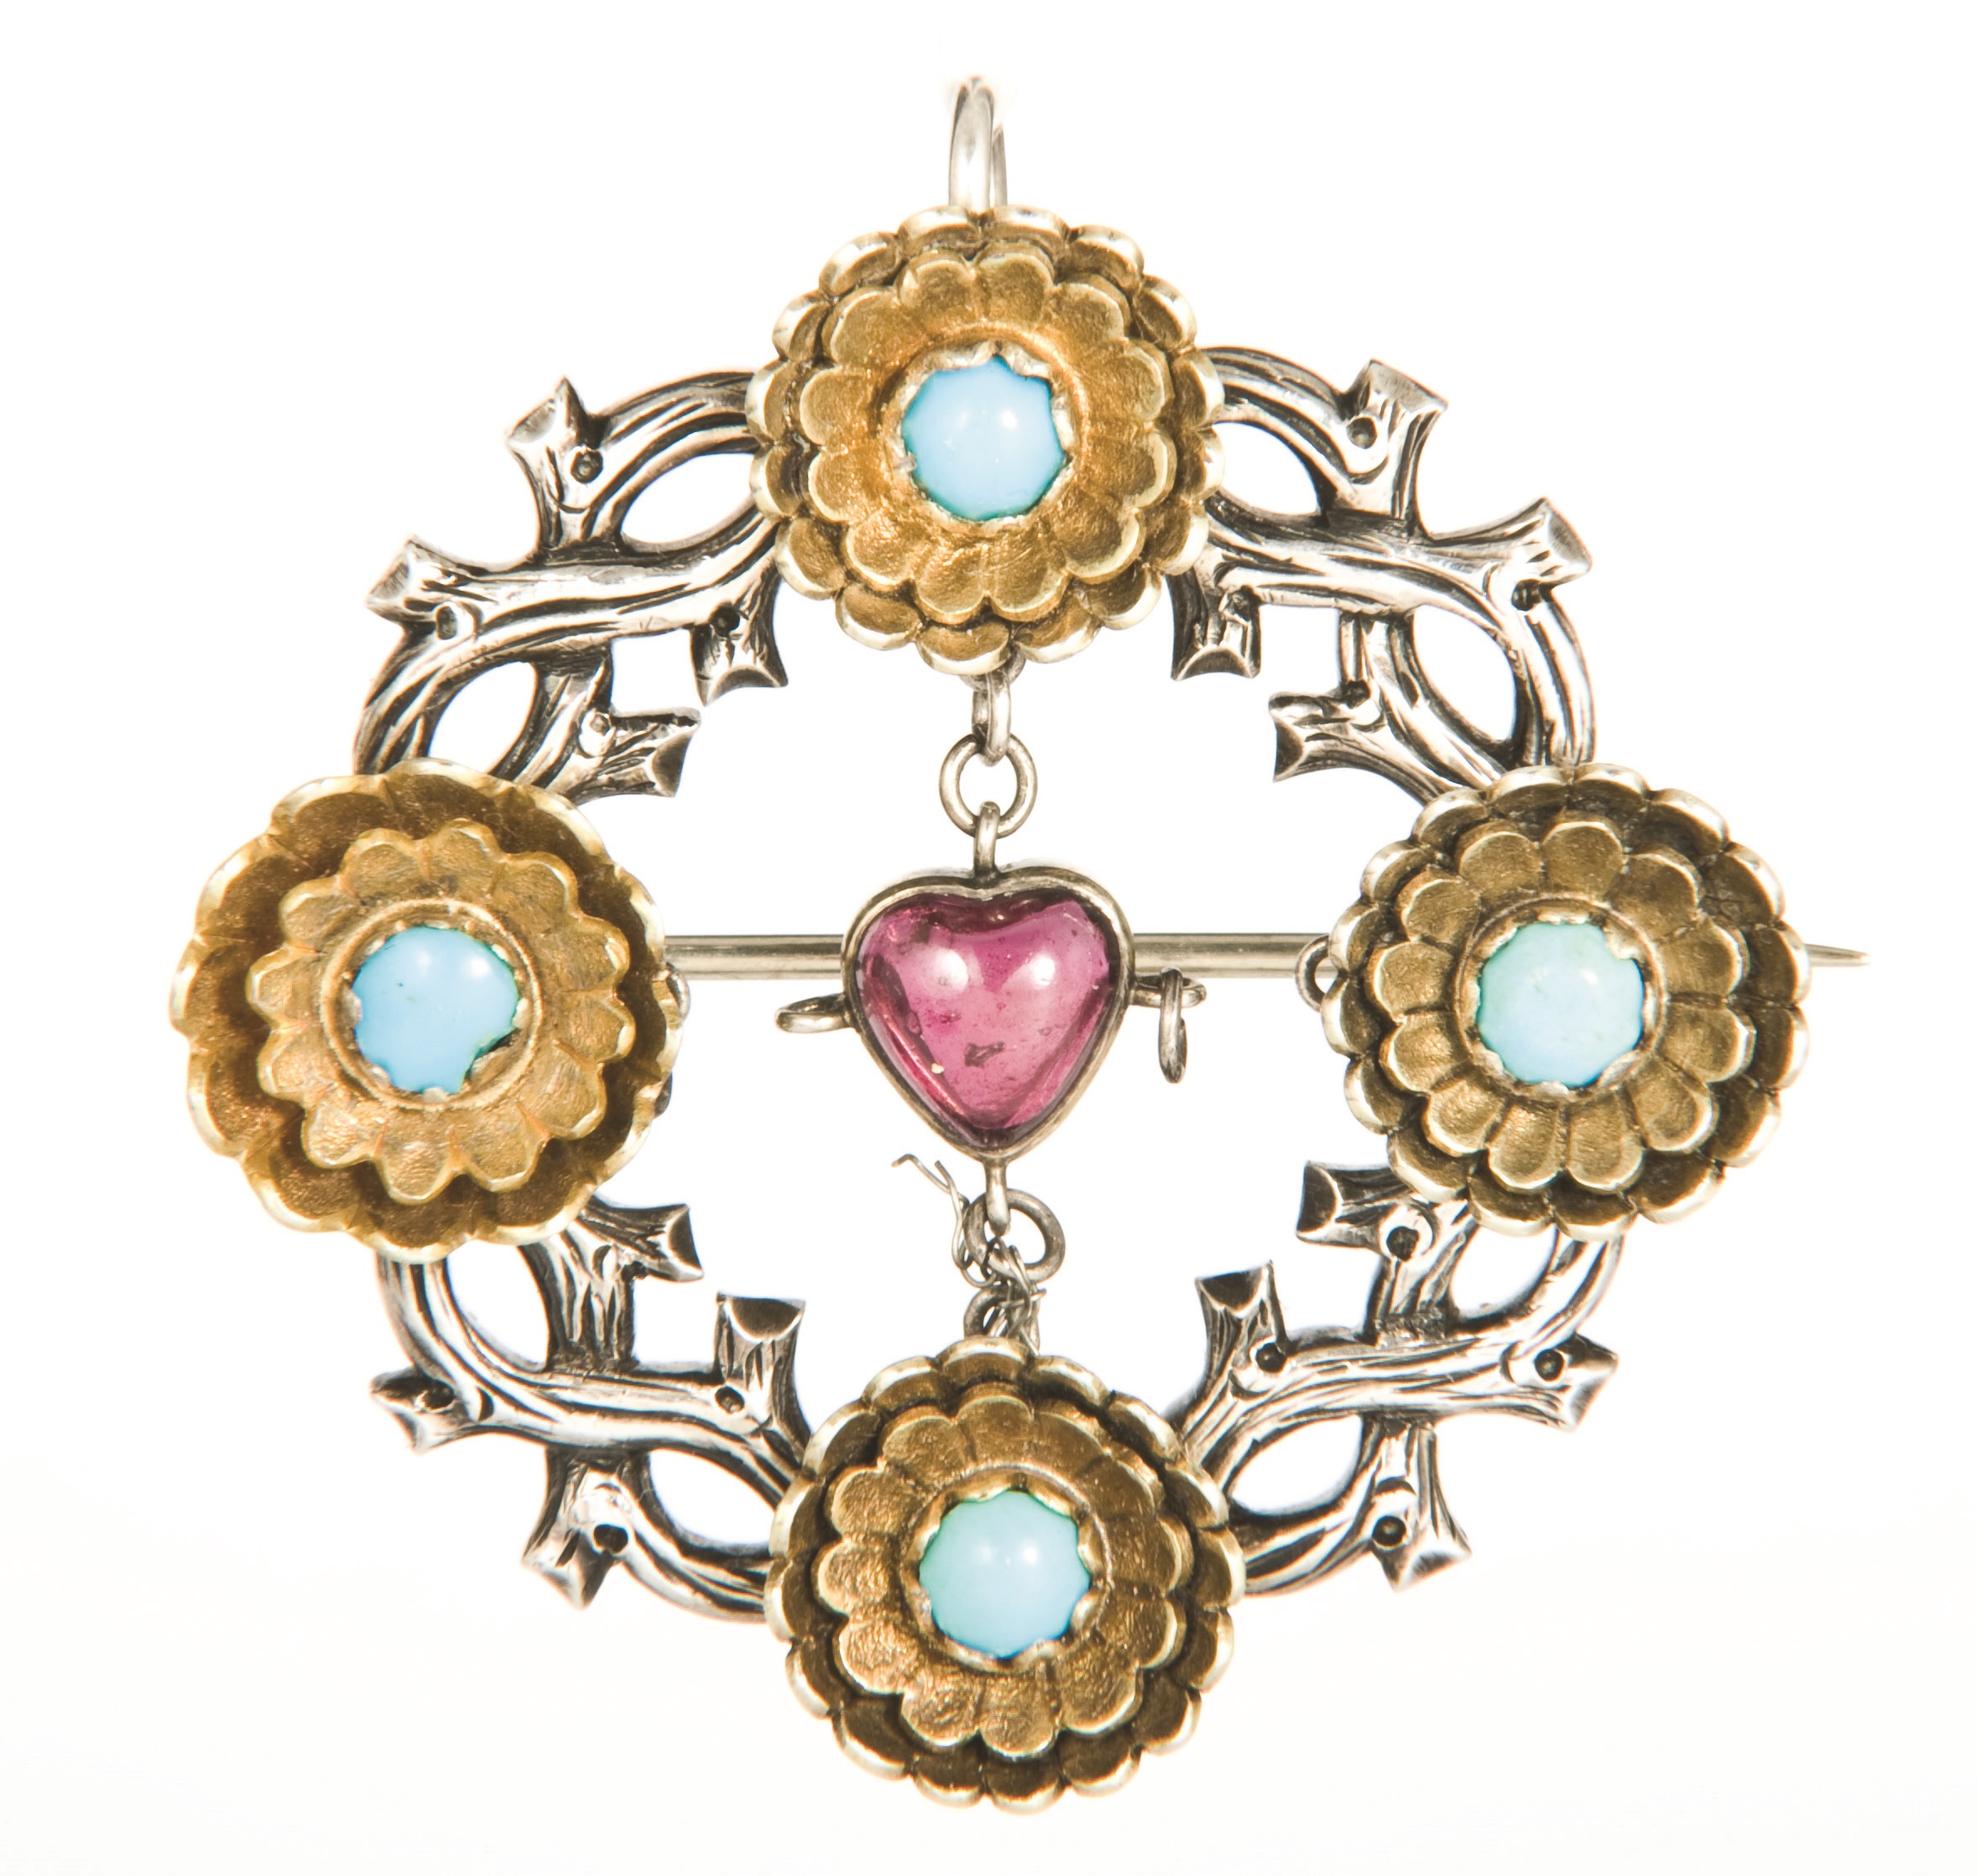 The 'Seddon' bridesmaid brooch, designed by William Burges, sold in 2011